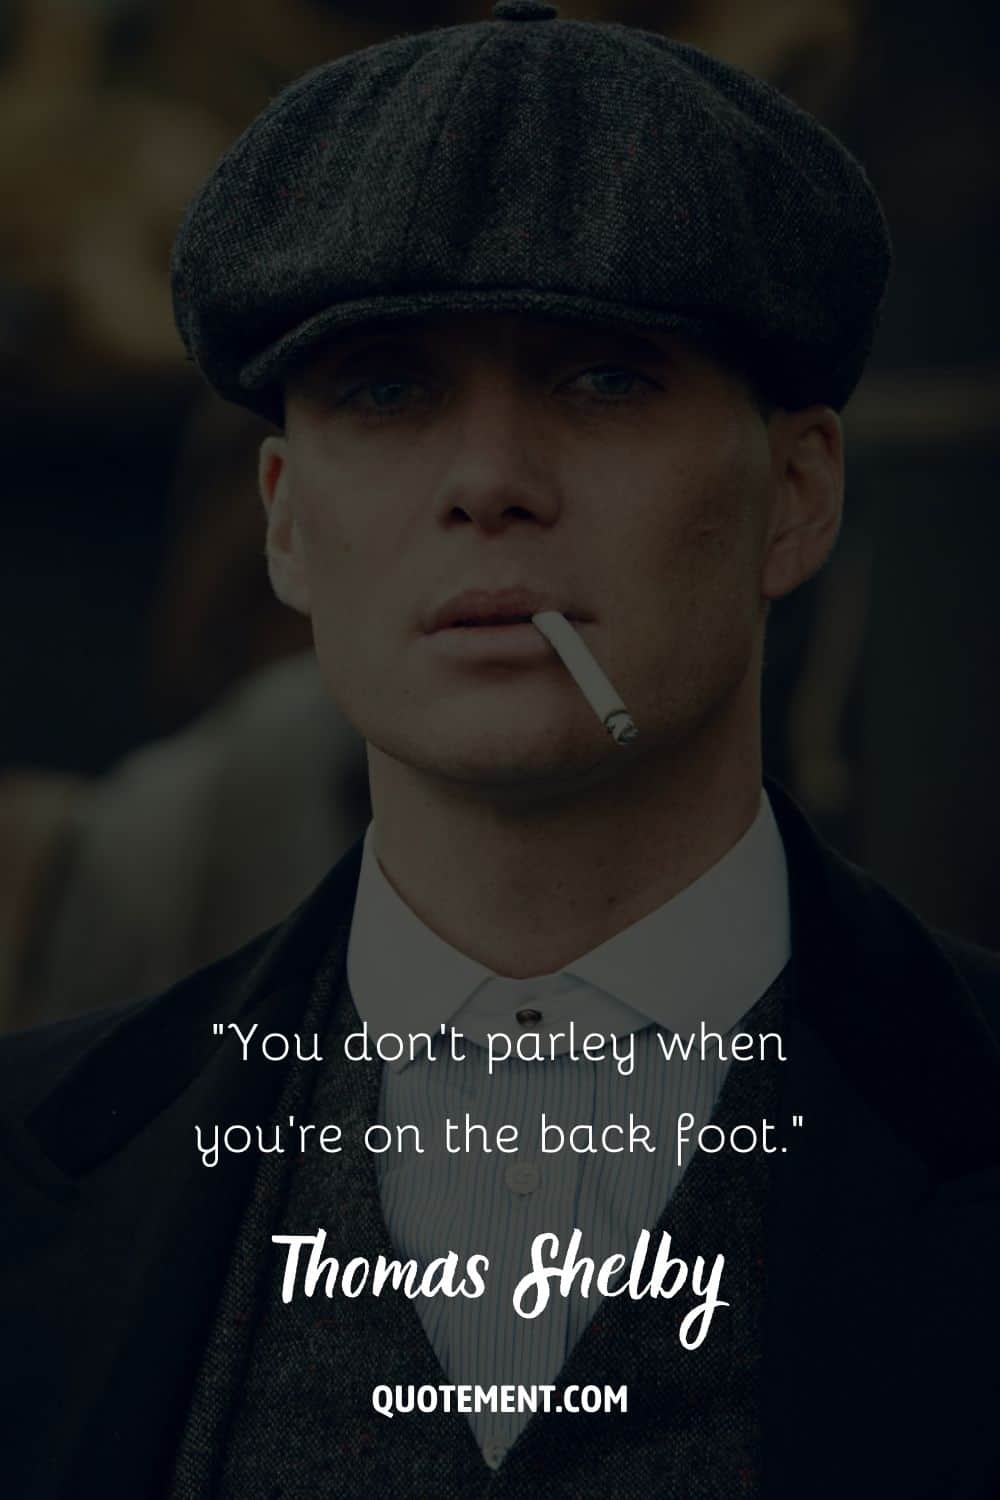 Cillian Murphy in character, cigarette adding charm representing thomas shelby quote about life
